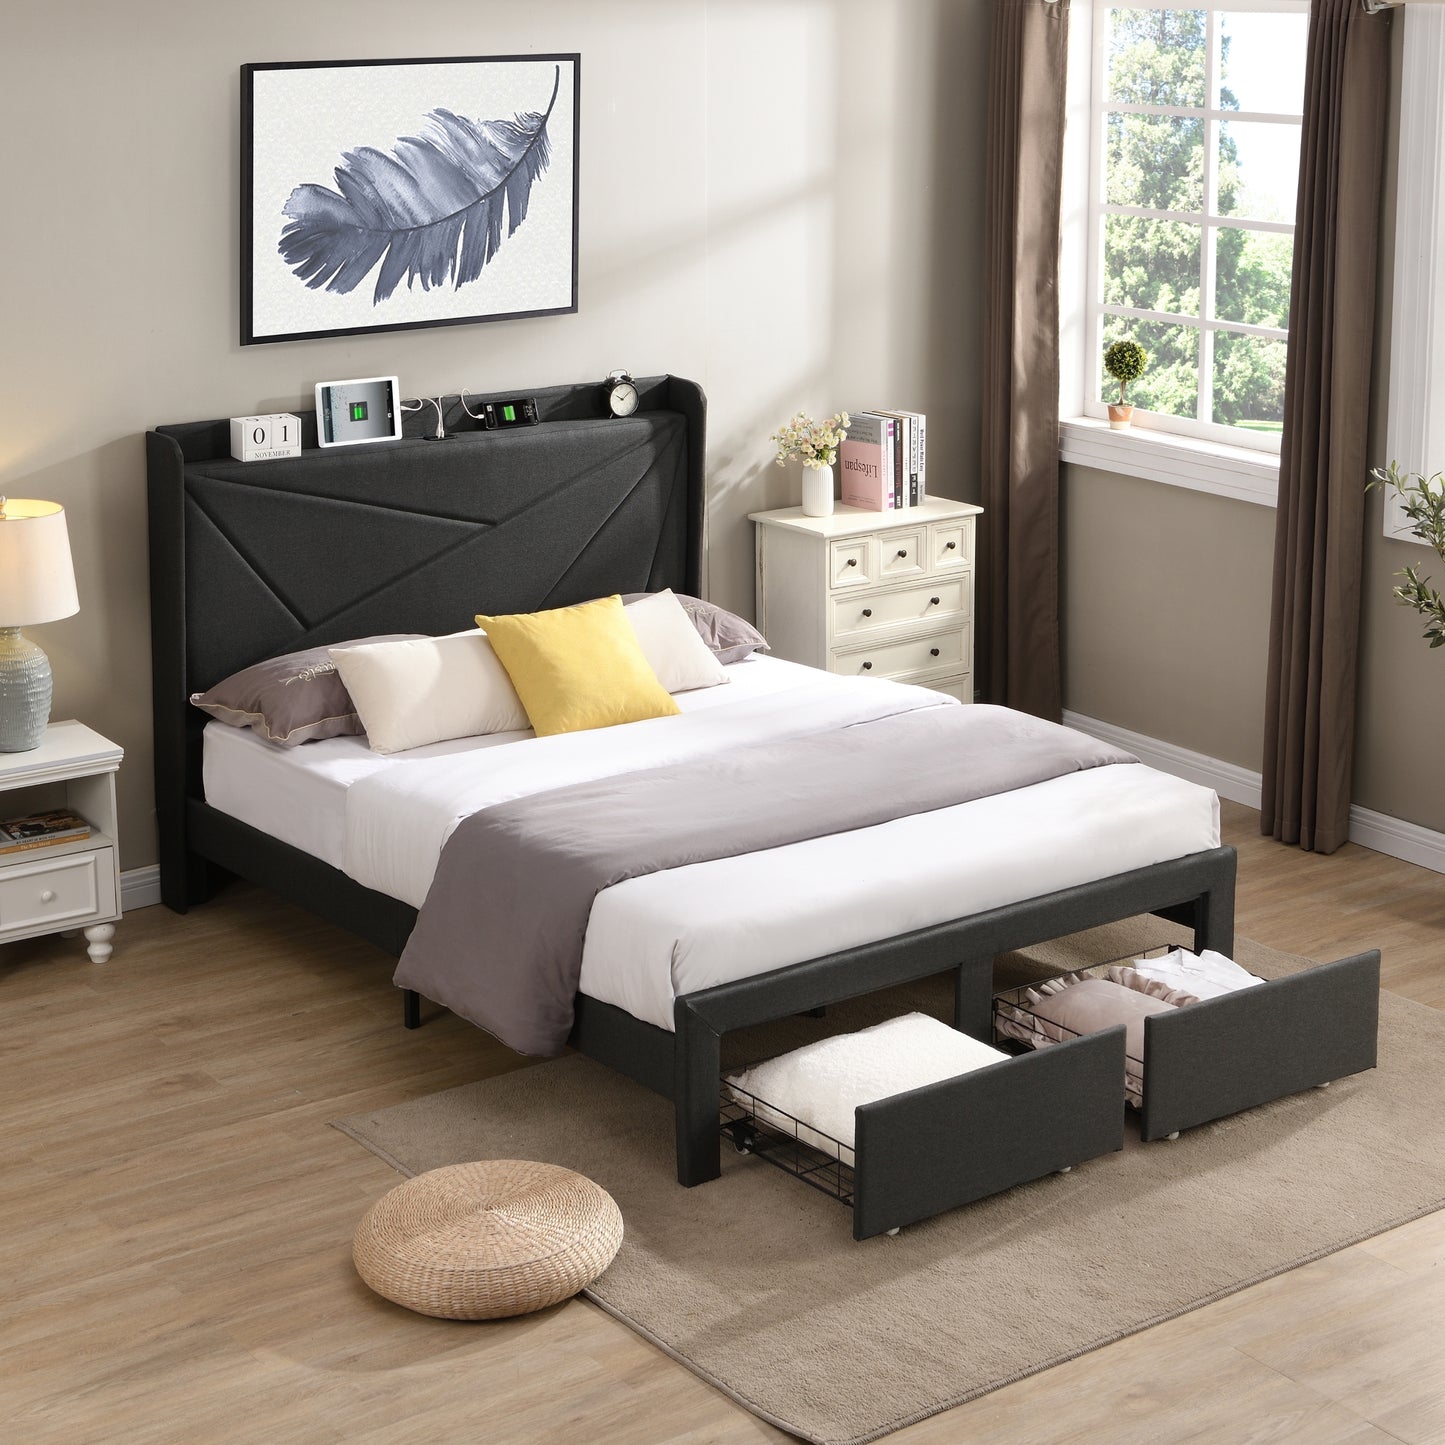 Queen Size Platform Bed Frame with 2 Storage Drawers, Upholstered Bed Frame with Wingback Headboard Storage Shelf Built-in USB Charging Stations and Strong Wood Slats Support, No Box Spring Needed, Dark Gray